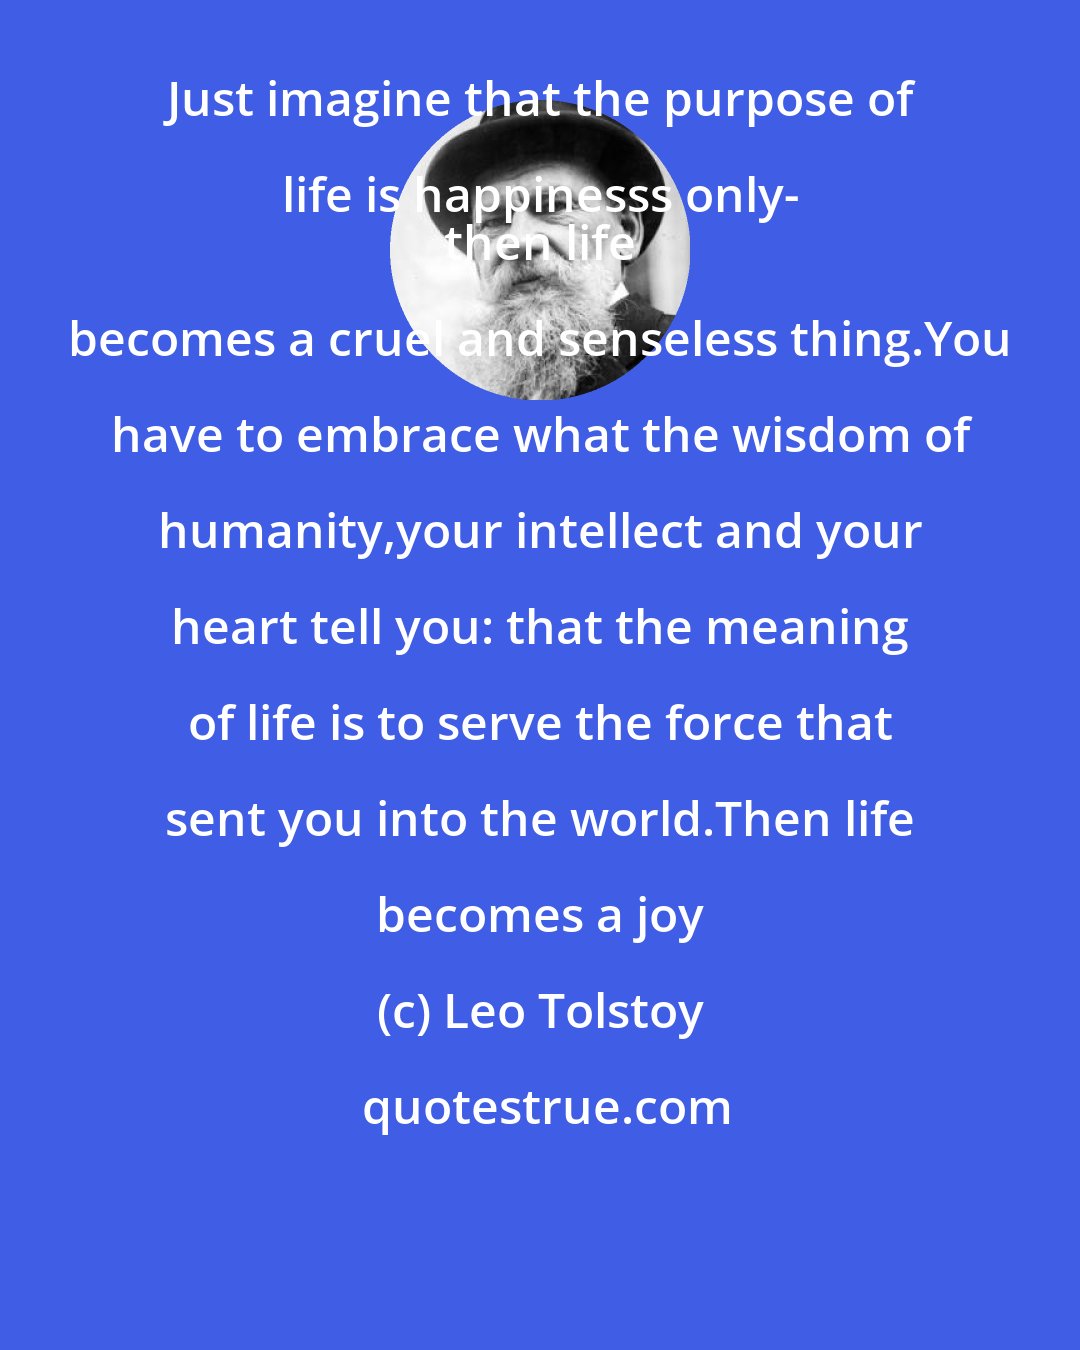 Leo Tolstoy: Just imagine that the purpose of life is happinesss only- 
 then life becomes a cruel and senseless thing.You have to embrace what the wisdom of humanity,your intellect and your heart tell you: that the meaning of life is to serve the force that sent you into the world.Then life becomes a joy